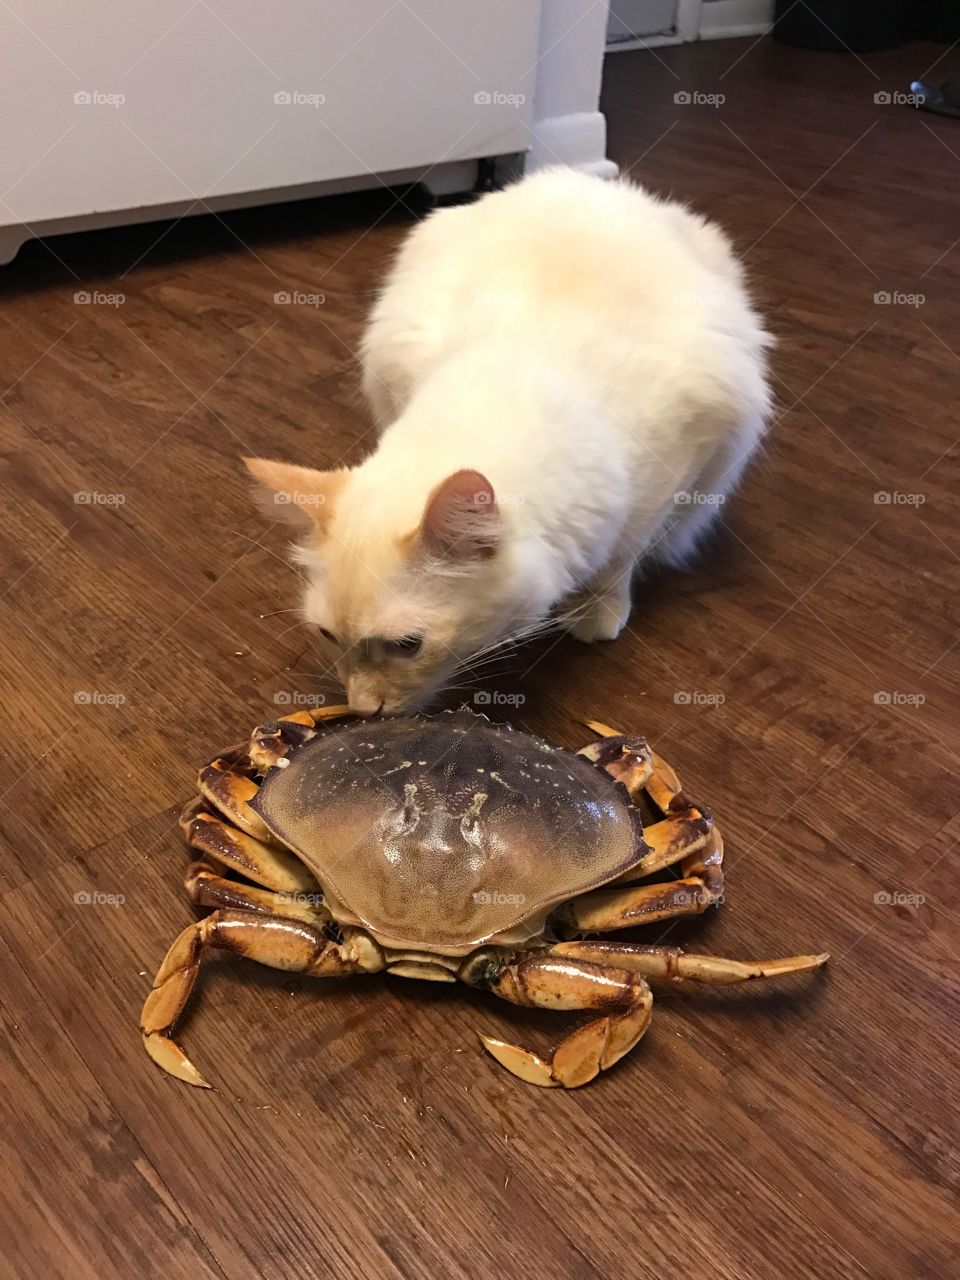 Fighting with the crab.